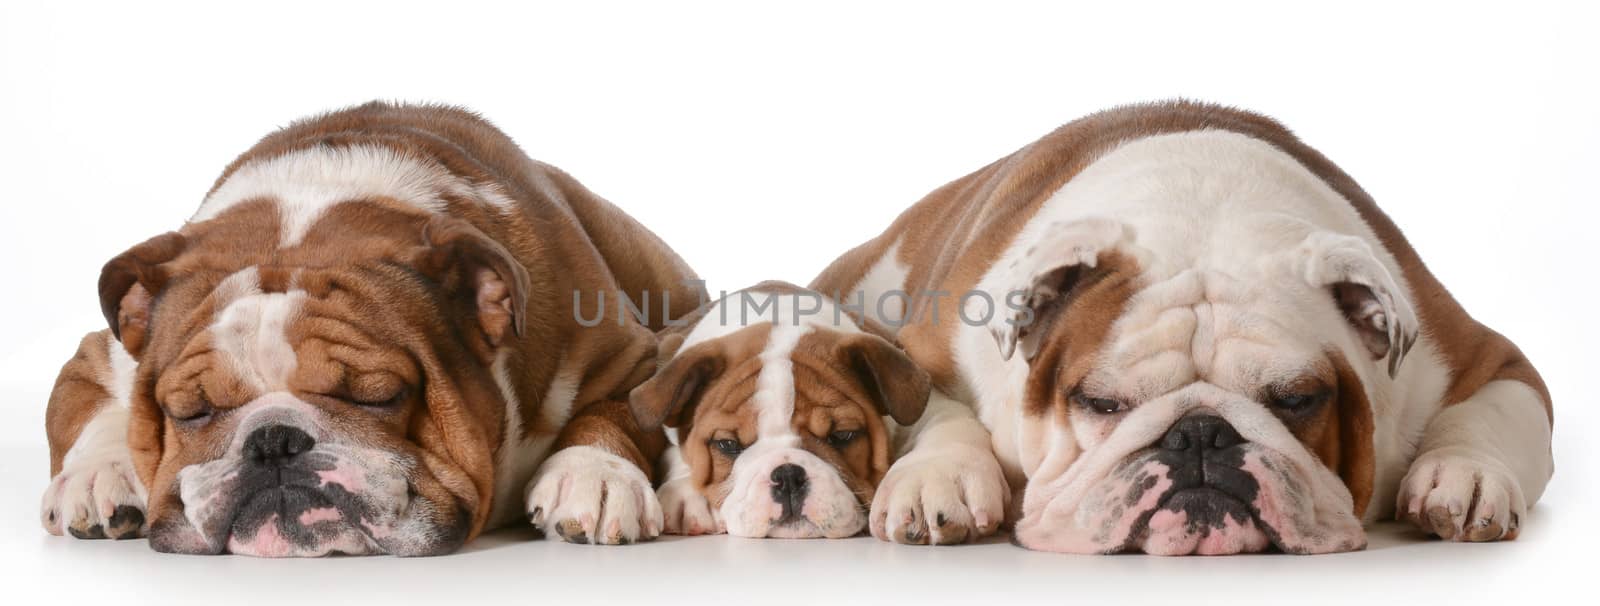 father son and grandson dogs - english bulldogs with three generations laying down side by side isolated on white background - father two years, son 10 weeks, grandfather 4 years